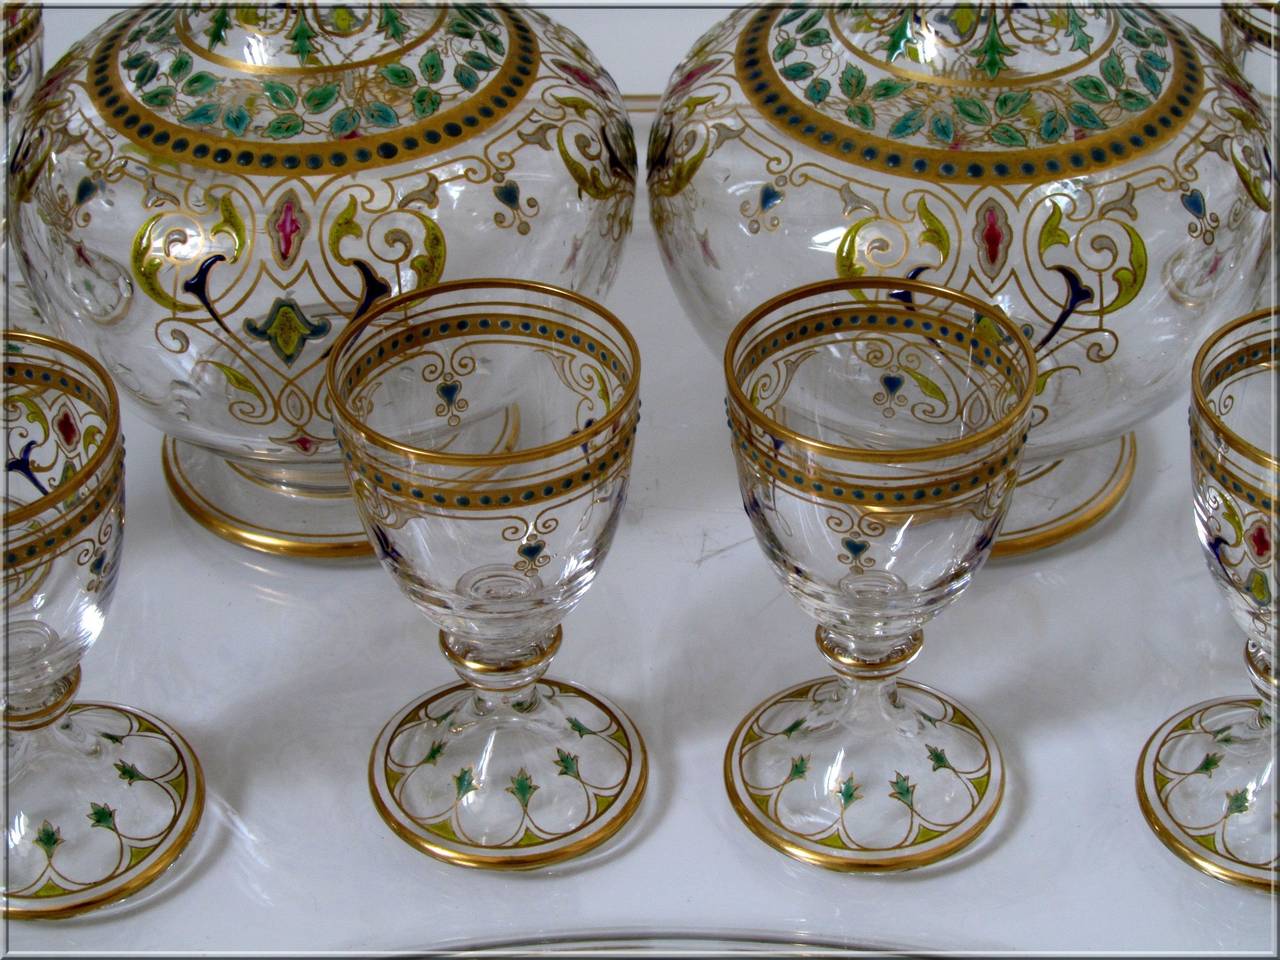 1870s Rare and Antique French Baccarat Enameled Crystal Liquor Service Decanters Pair, Cordials, Tray

Exceptional and antique French Baccarat crystal liquor service Moorish-inspired décor., Napoleon III period. Comprising two decanters, eight